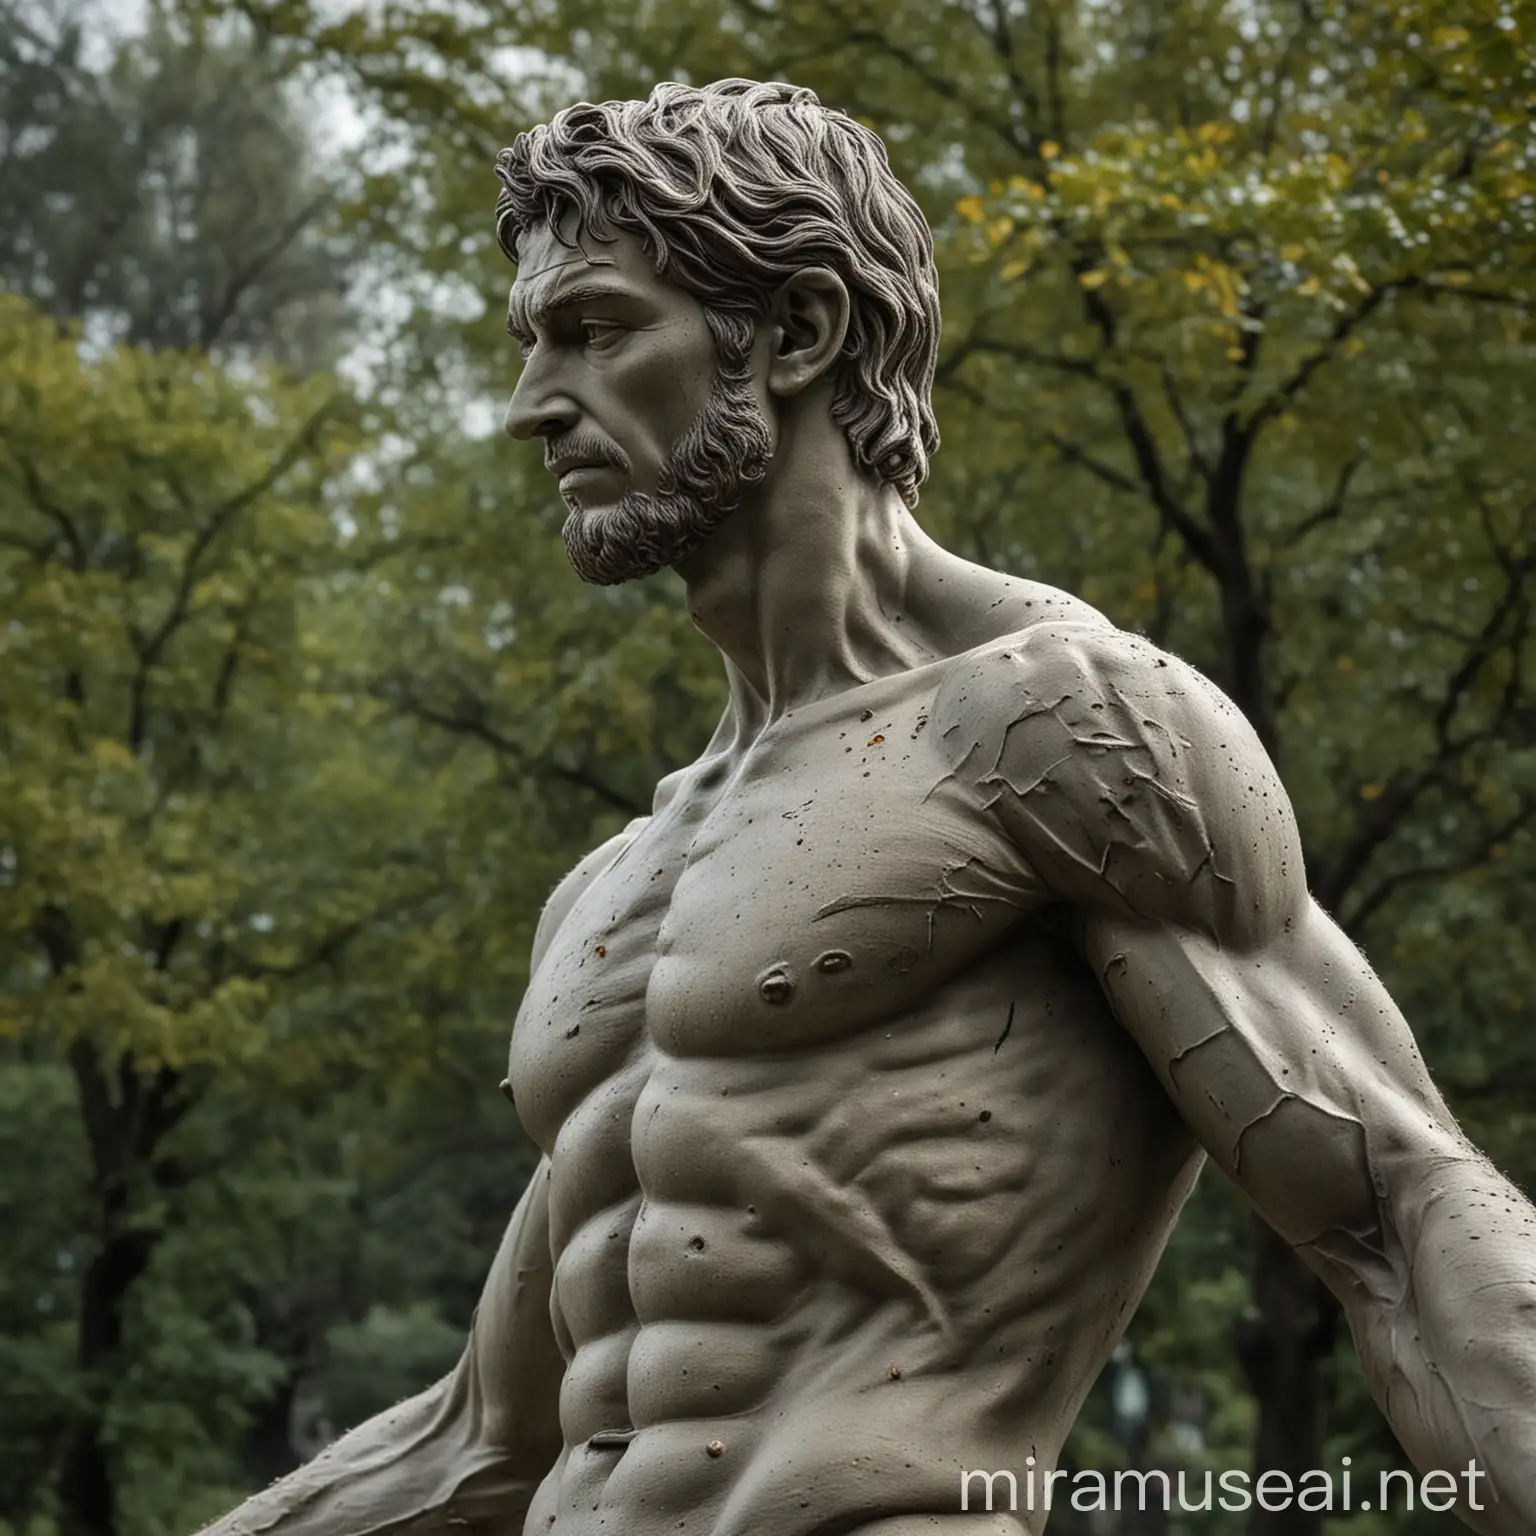 Realistic HyperDetailed Statue of Man Captured with 800mm Lens Professional Photography Masterpiece